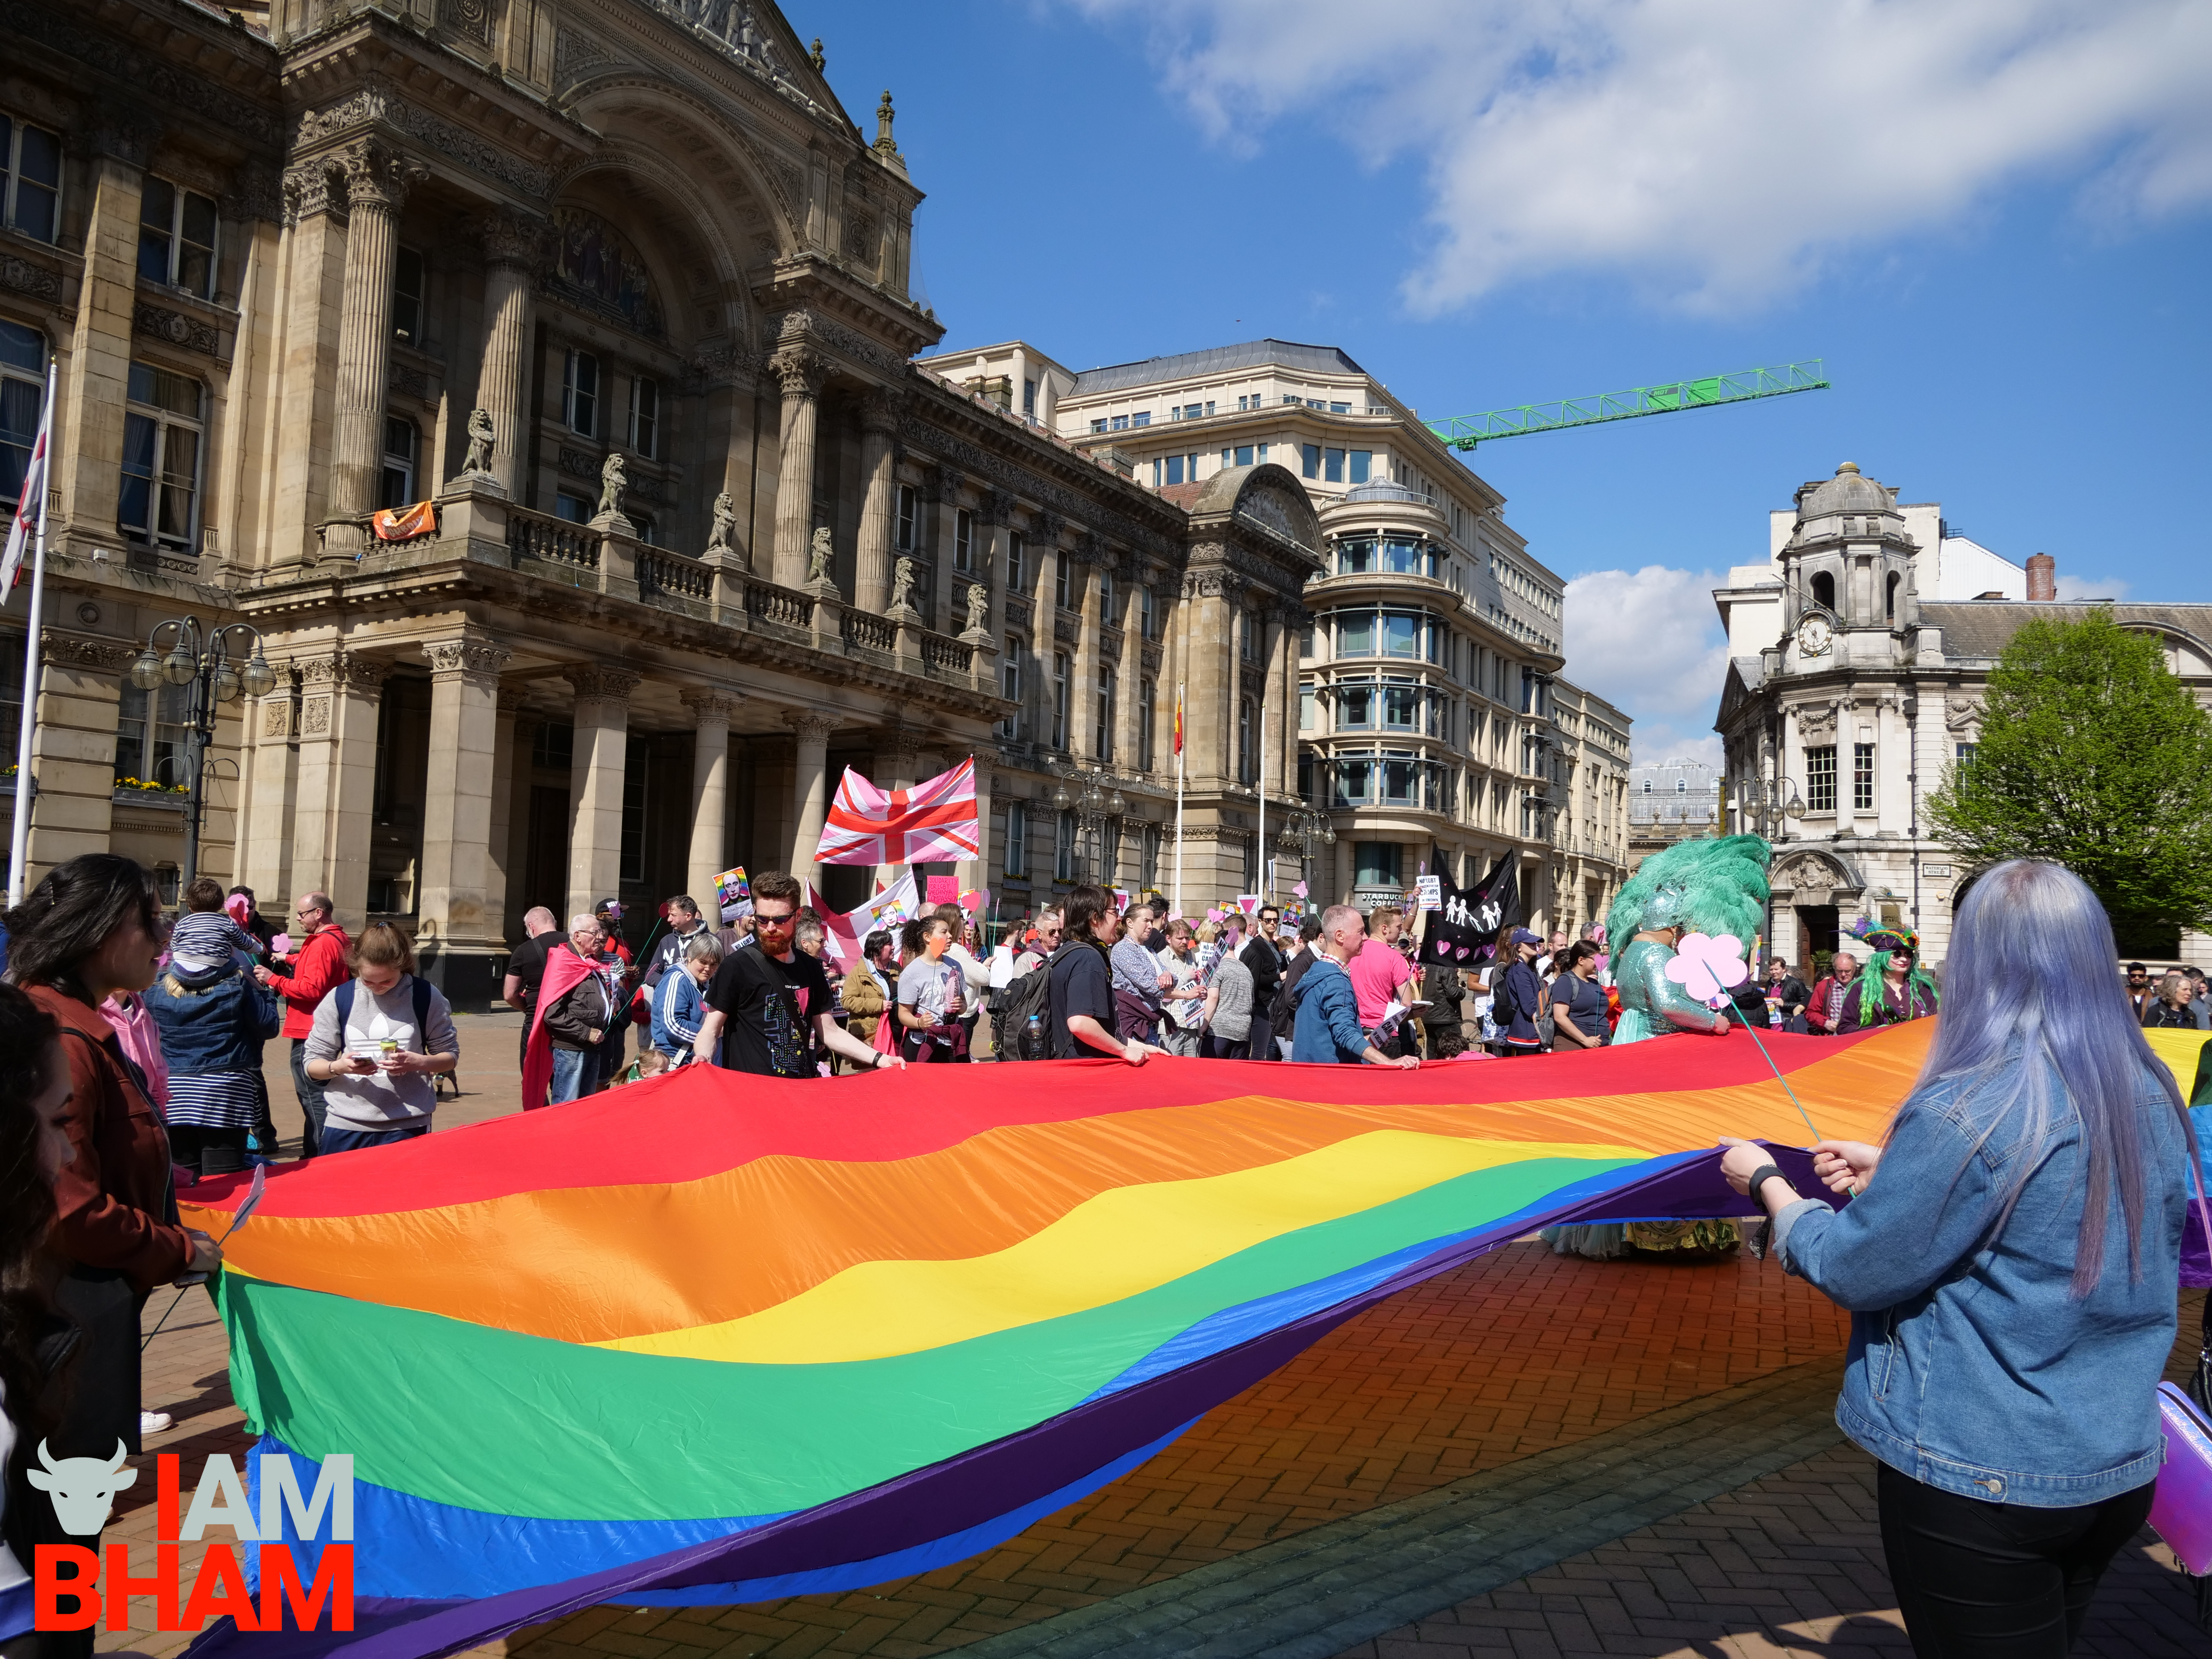 A large LGBT rainbow flag was unfurled in Victoria Square during the solidarity rally (Photograph: Adam Yosef)